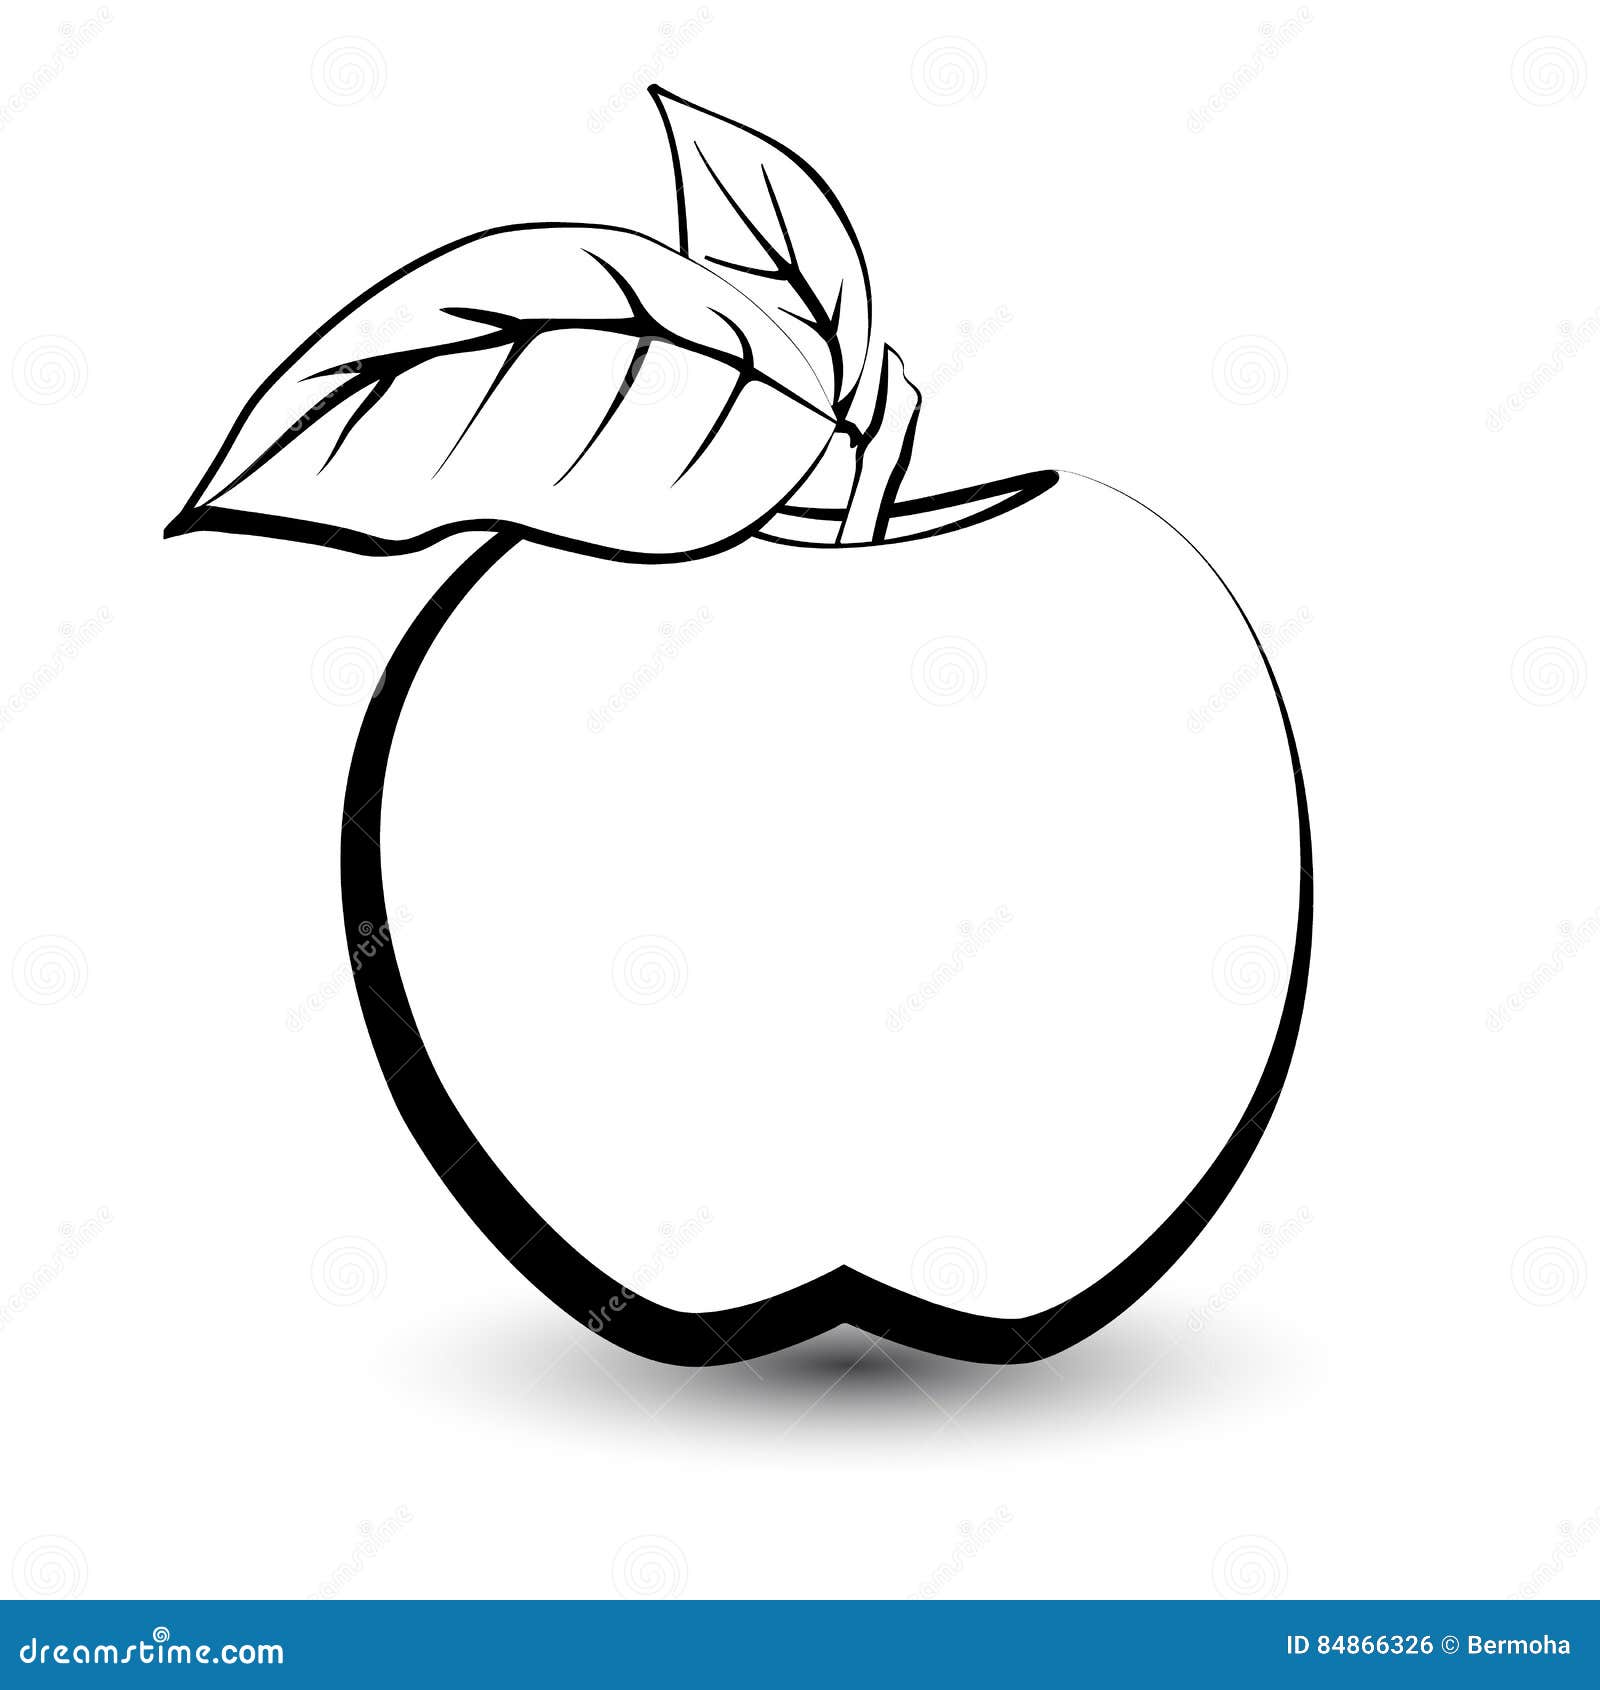 Apple Outline Images  Browse 61687 Stock Photos Vectors and Video   Adobe Stock